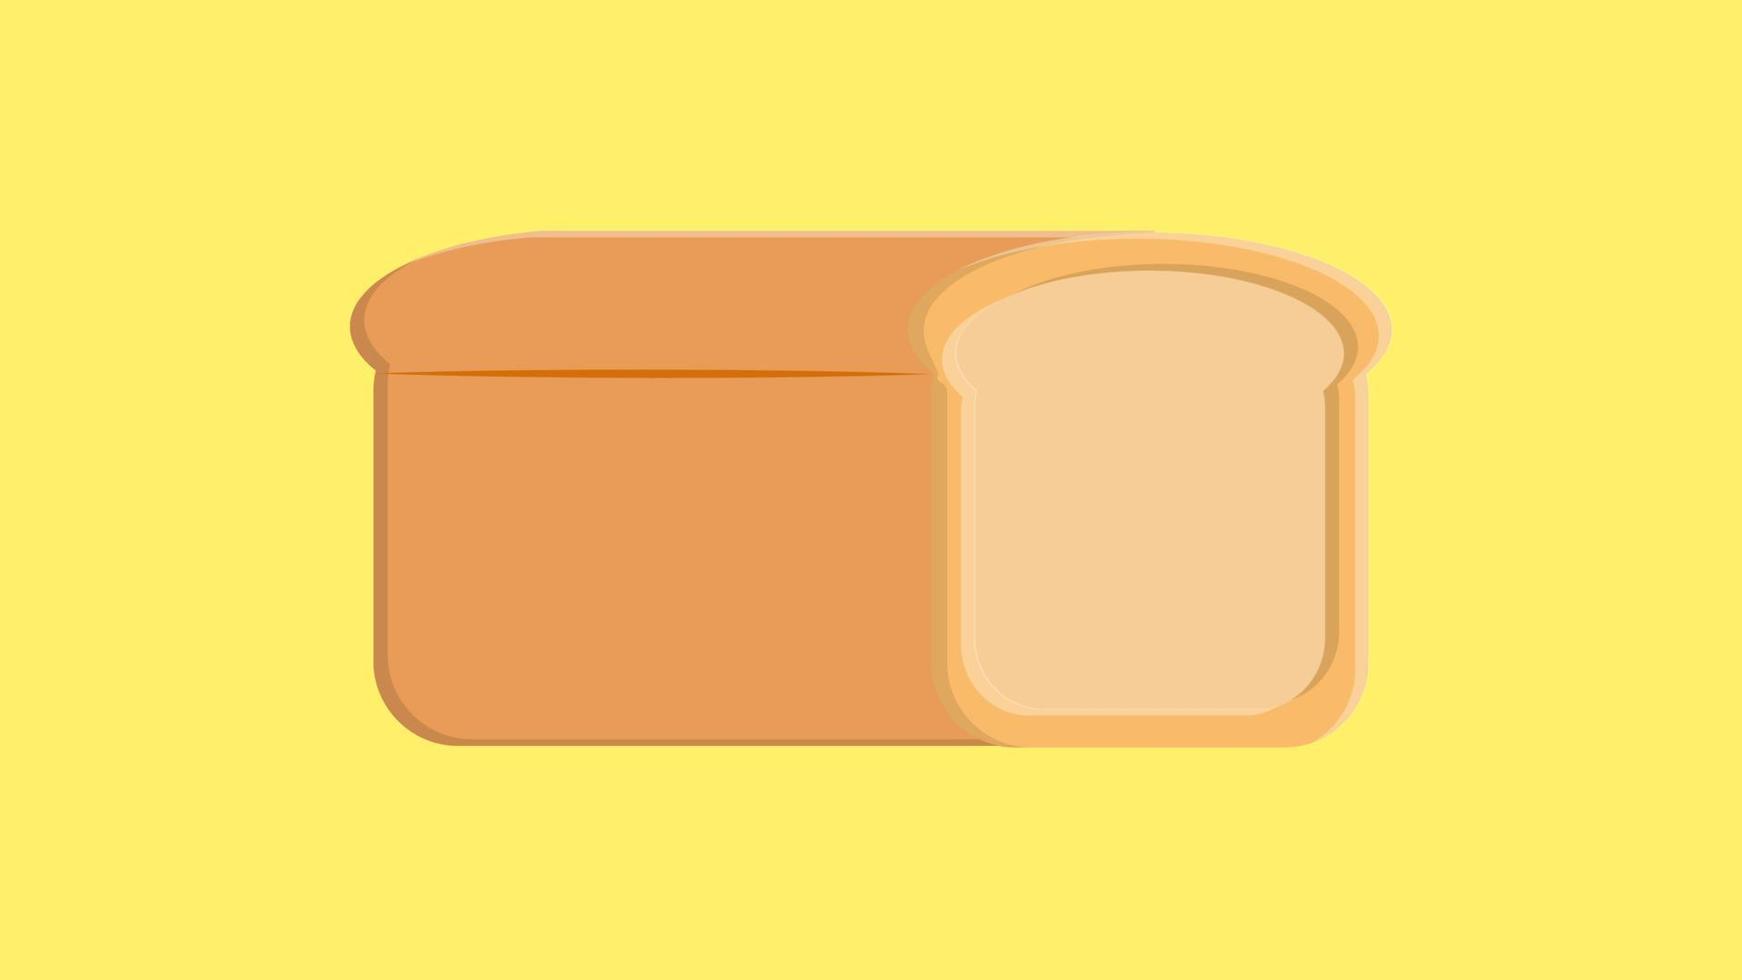 bread on a yellow background. vector illustration. loaf of bread for food. gluten free food. vegan food. illustration for decorating cafe, restaurant, bakery